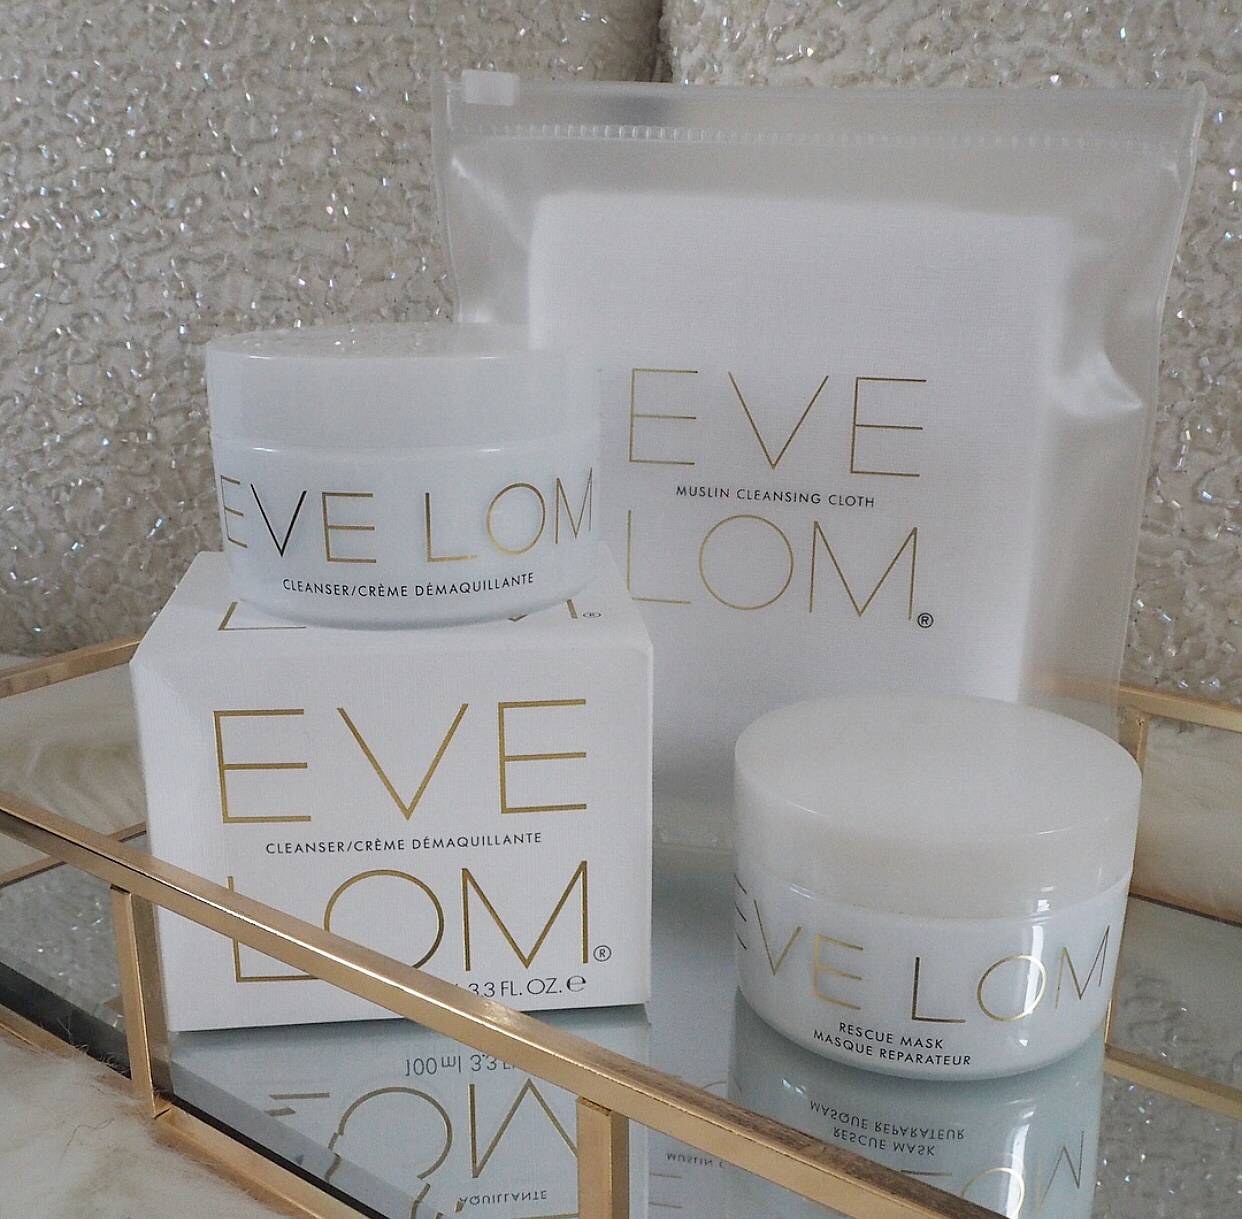 Eve Lom Cleanser and Rescue Mask